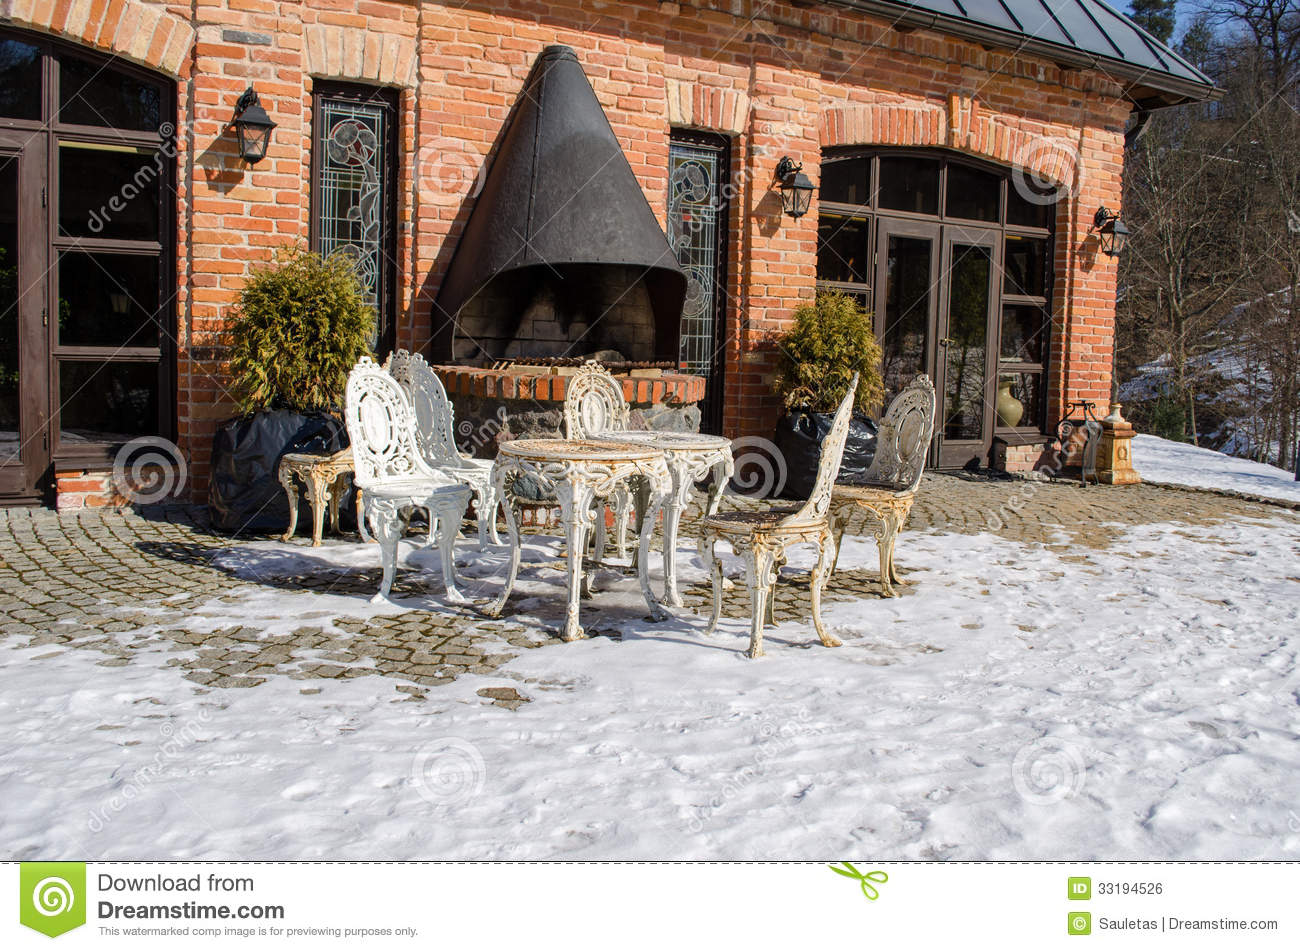 Retro Decorative Outdoor Table And Chairs Near Restaurant Fireplace